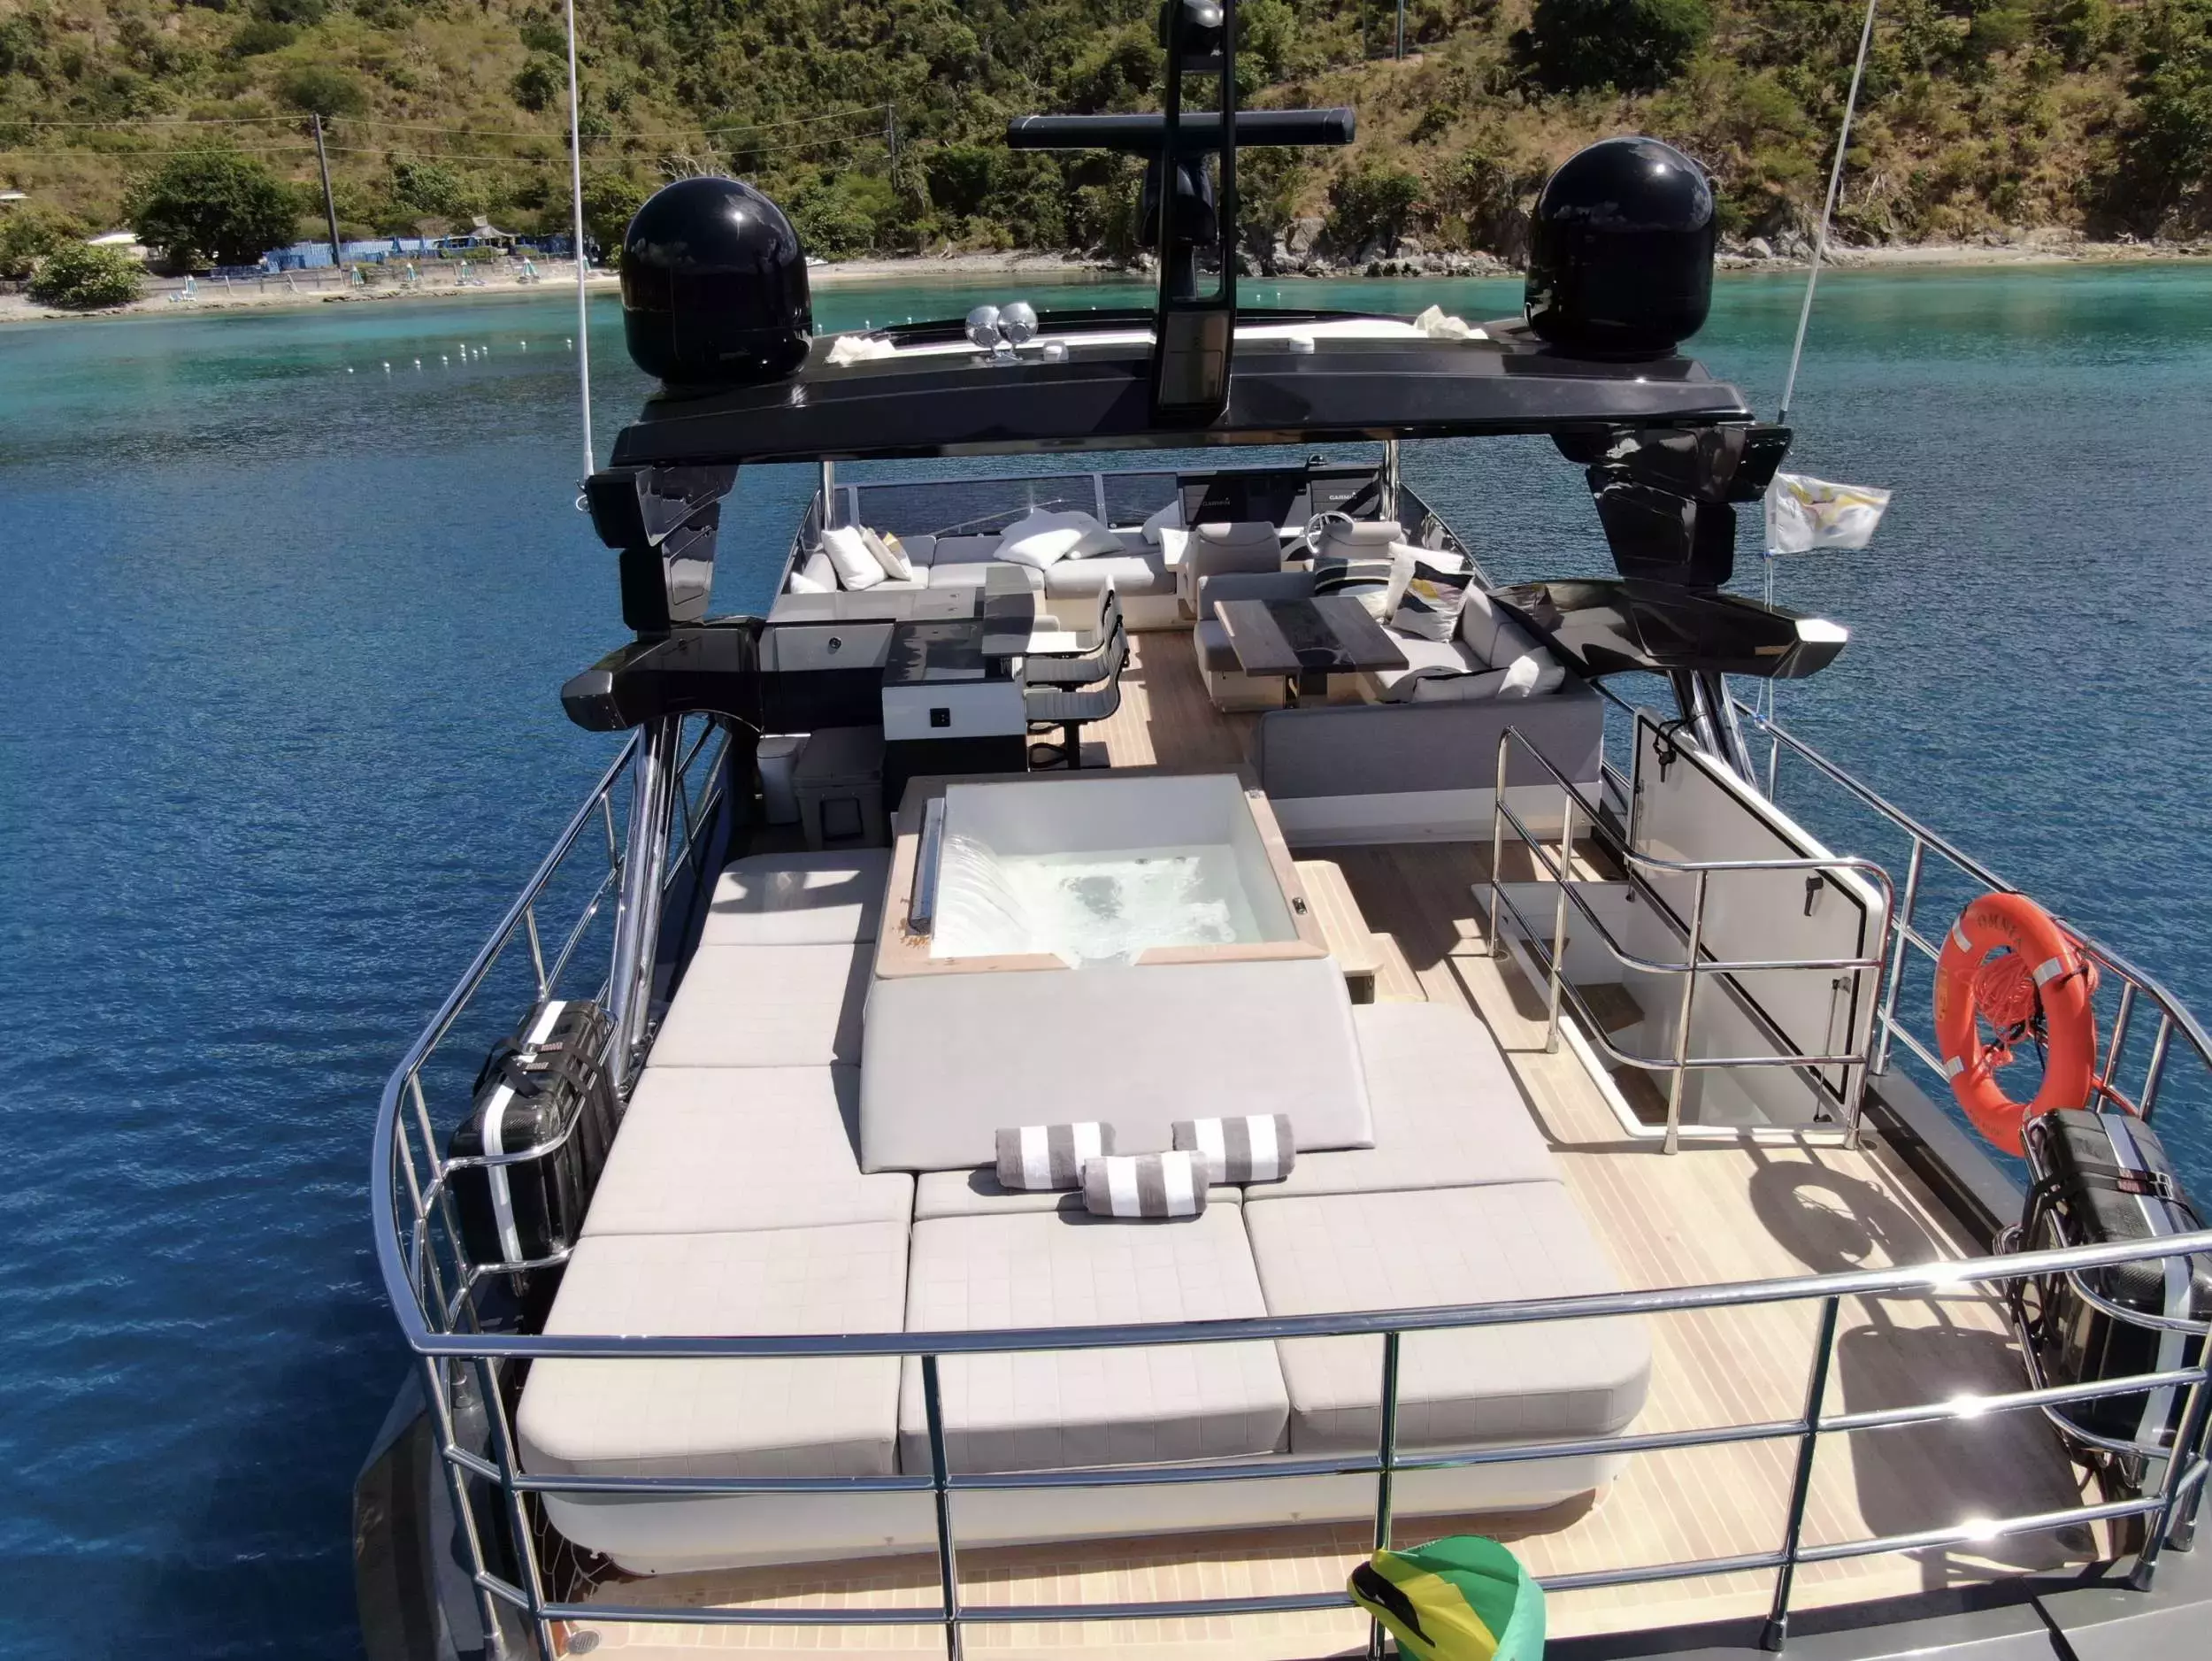 Omnia by Pearl - Top rates for a Charter of a private Motor Yacht in Bahamas